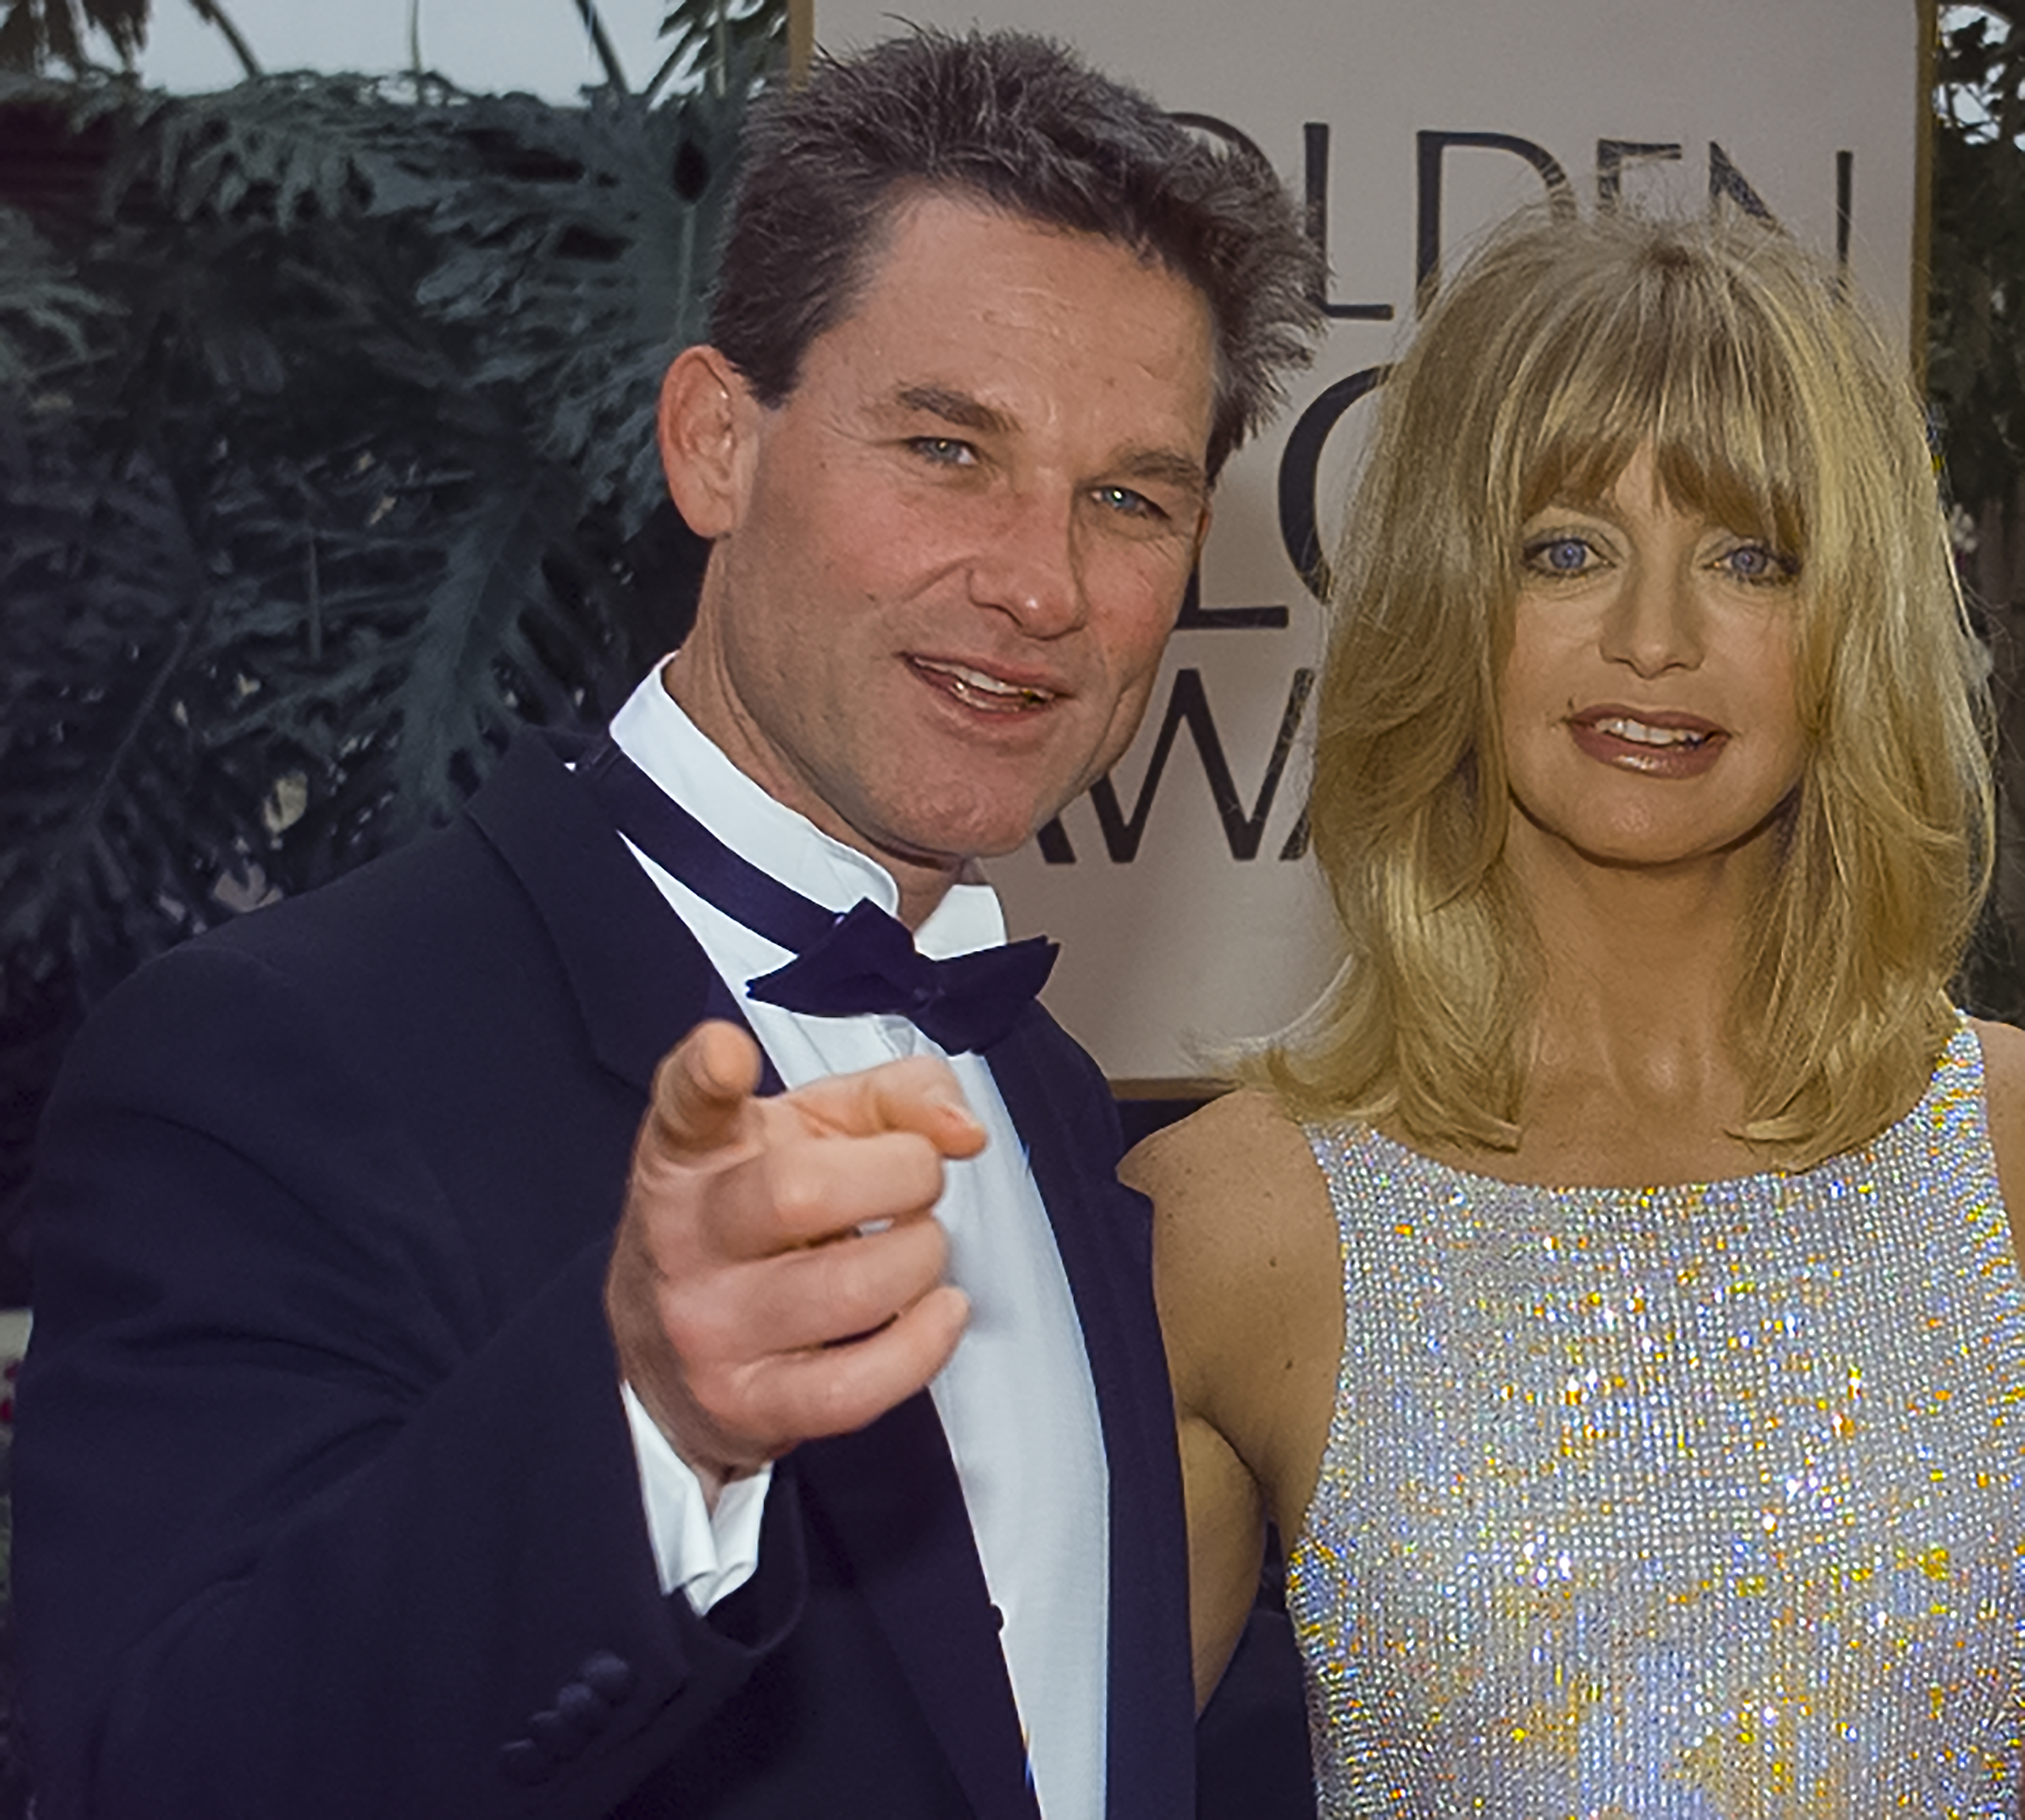 Goldie Hawn and Kurt Russell at the 55th Annual Golden Globes Awards Show on January 18, 1998 in Beverly Hills, California. l Source: Getty Images